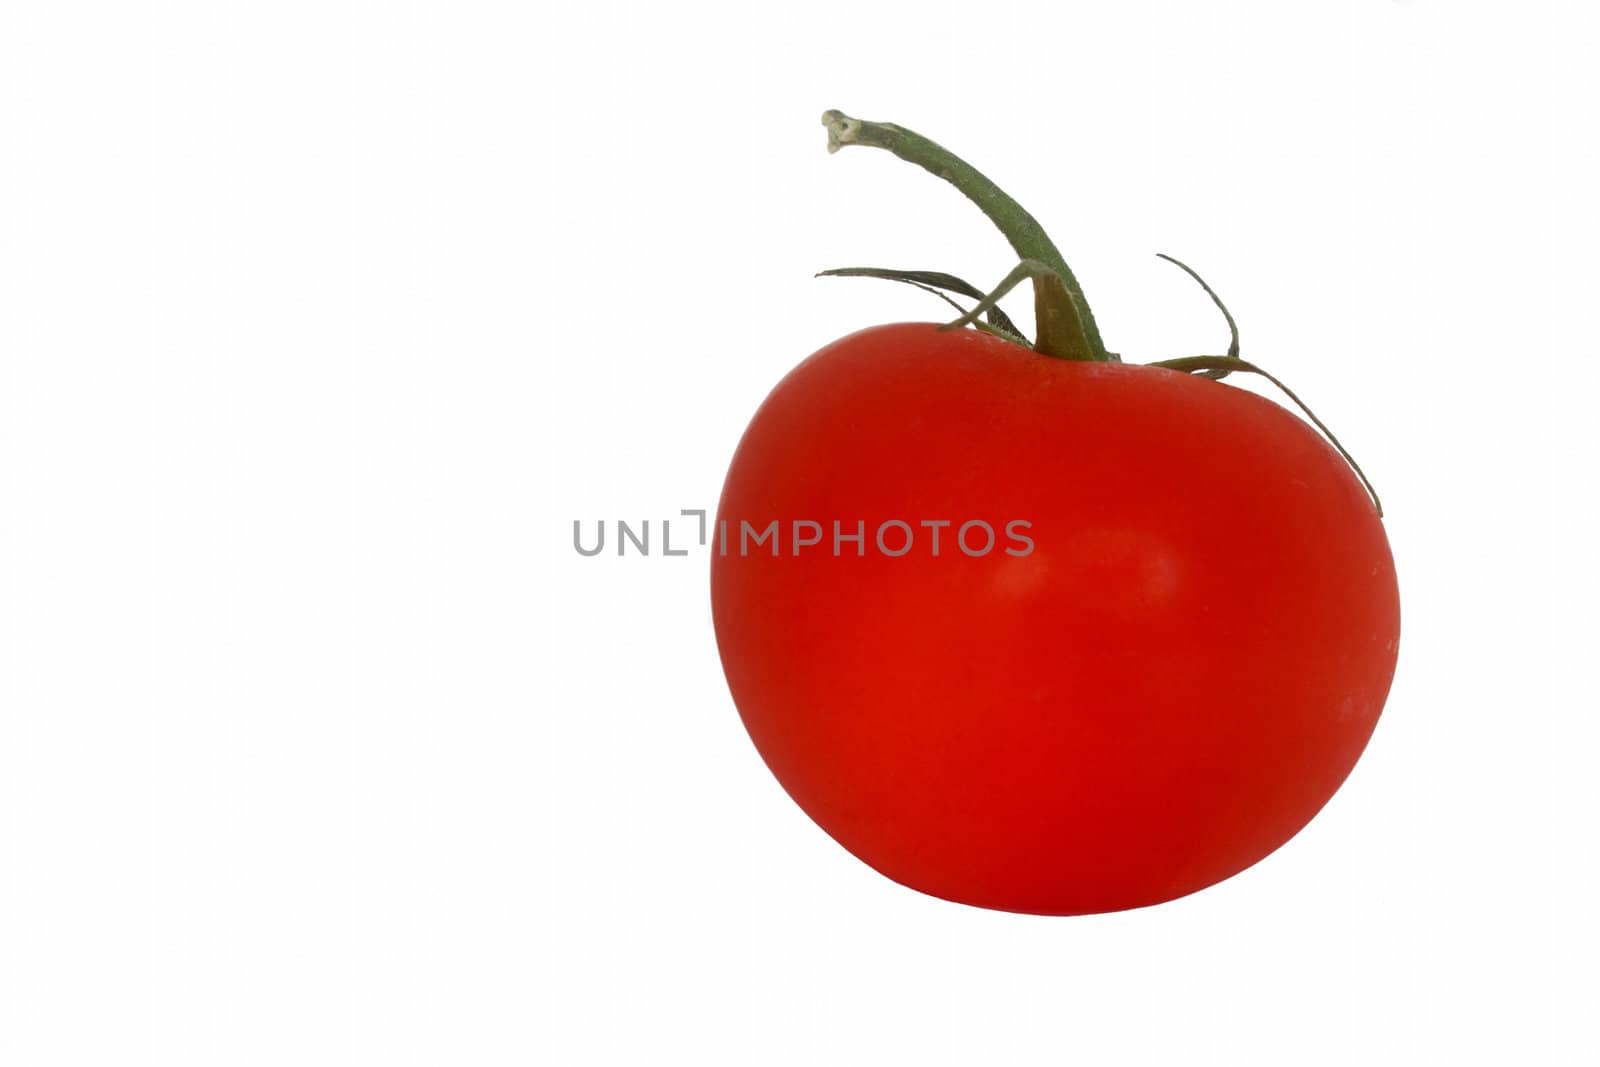 Ripe red tomato isolated on white background